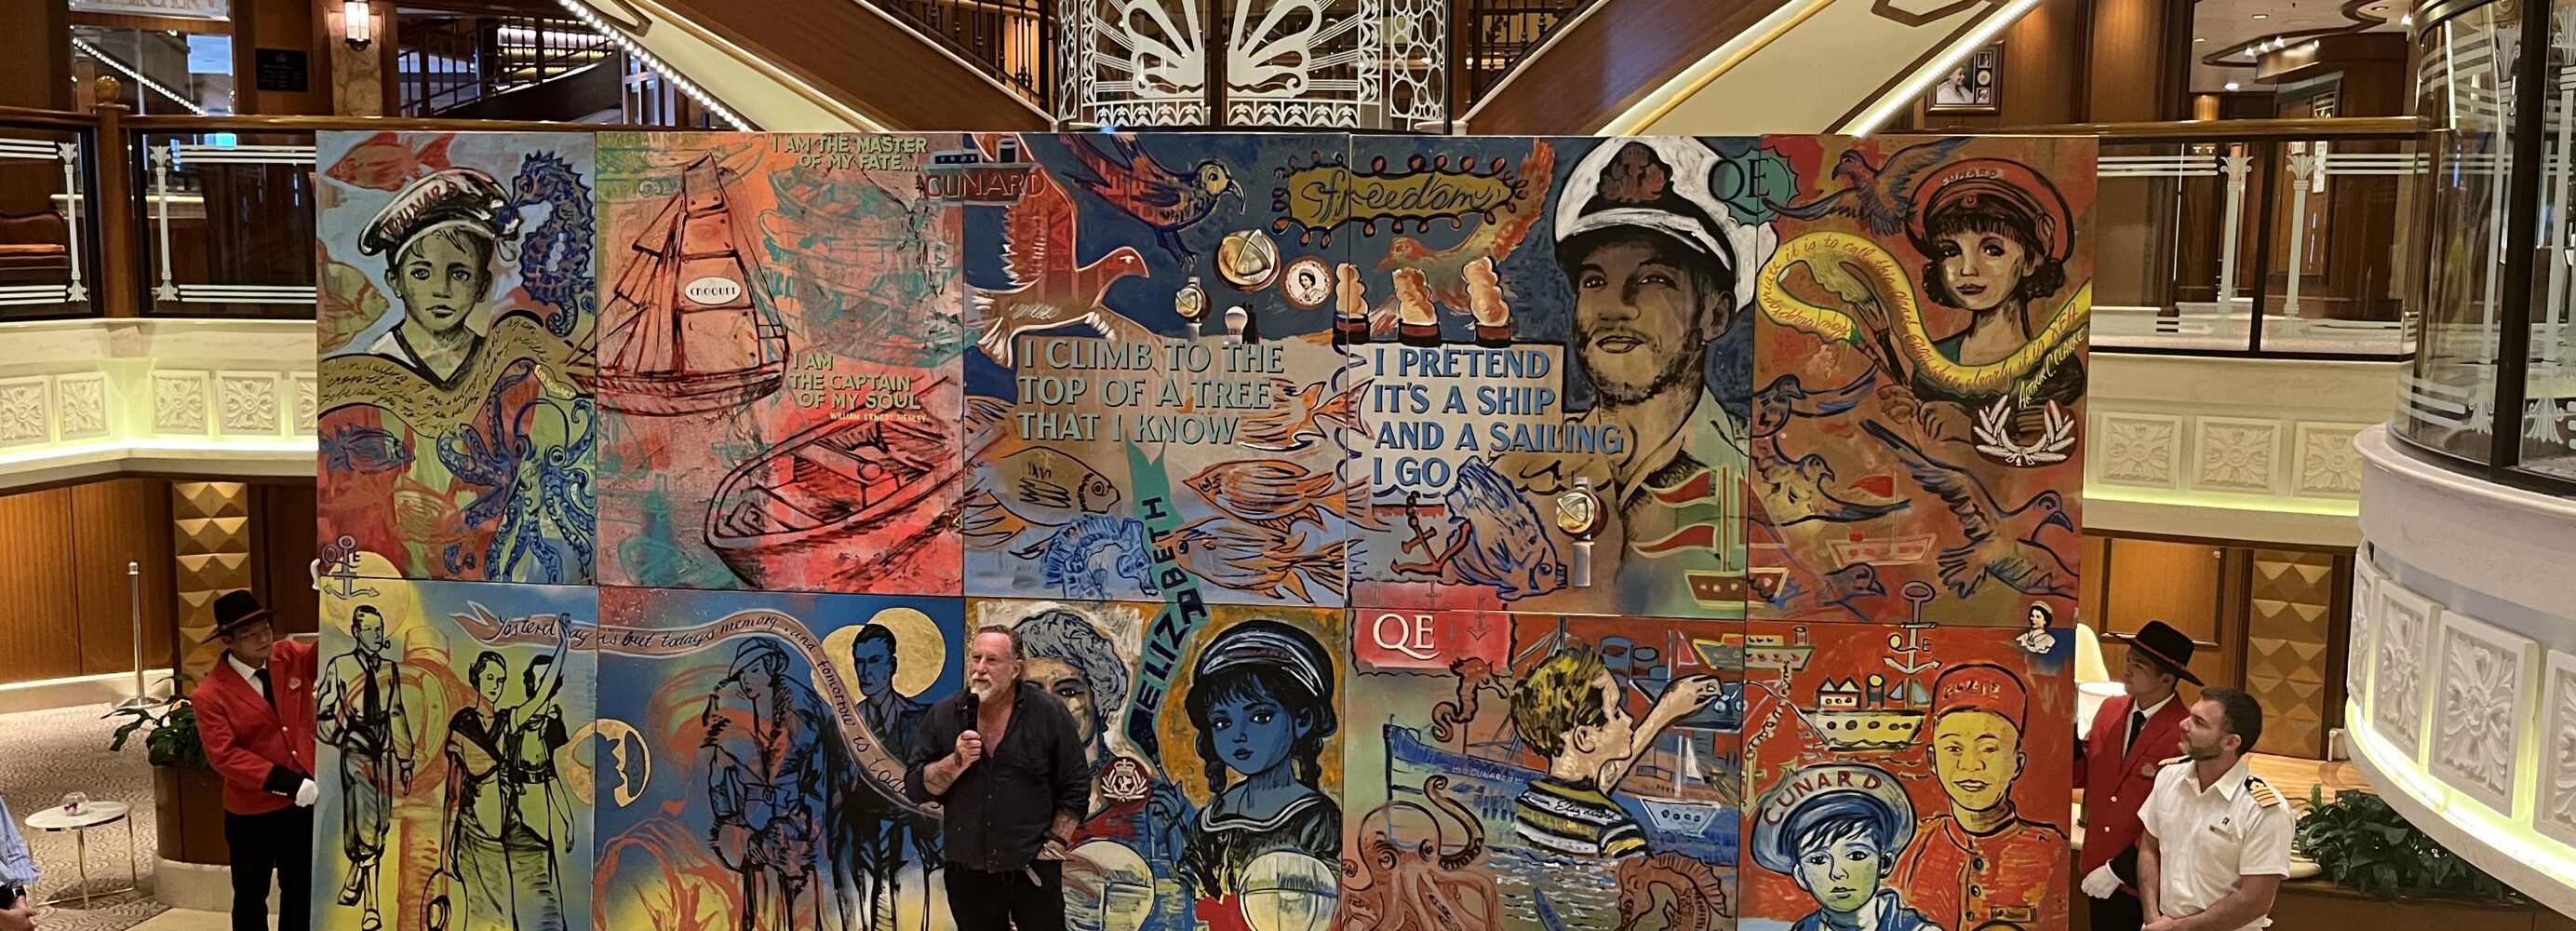 David Bromley finishes his masterpiece on Cunard's Queen Elizabeth